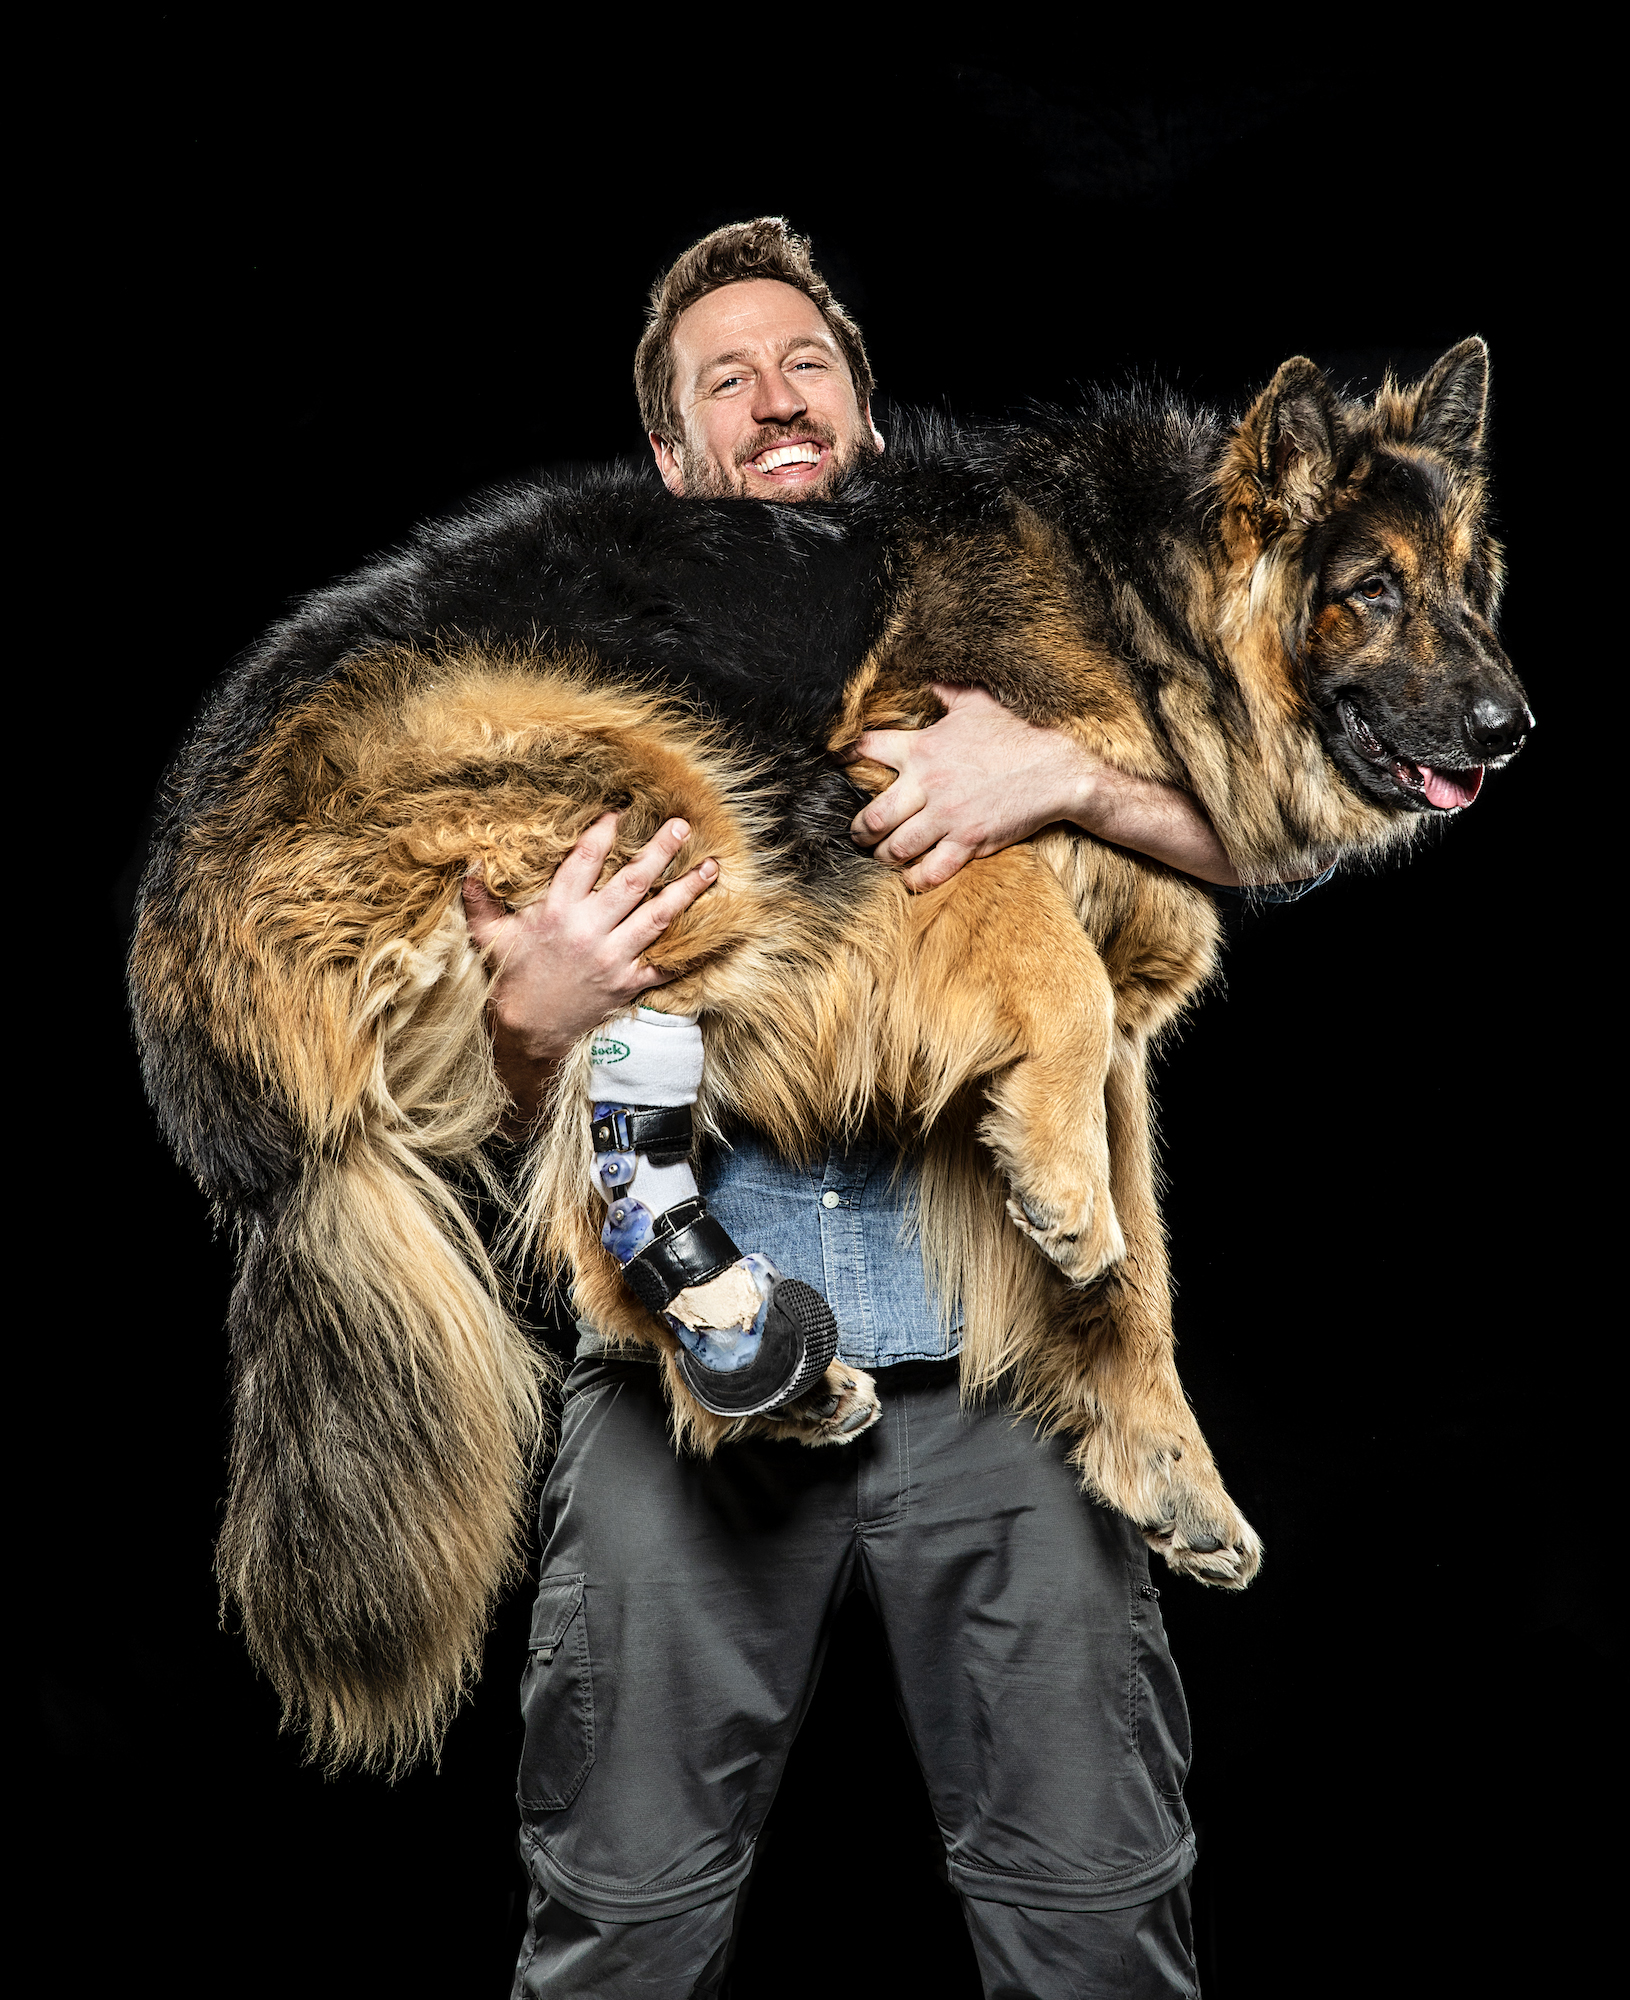 Derrick Campana holding Petey, a king shepherd who was born with one foot missing, photo by Steve Boyle